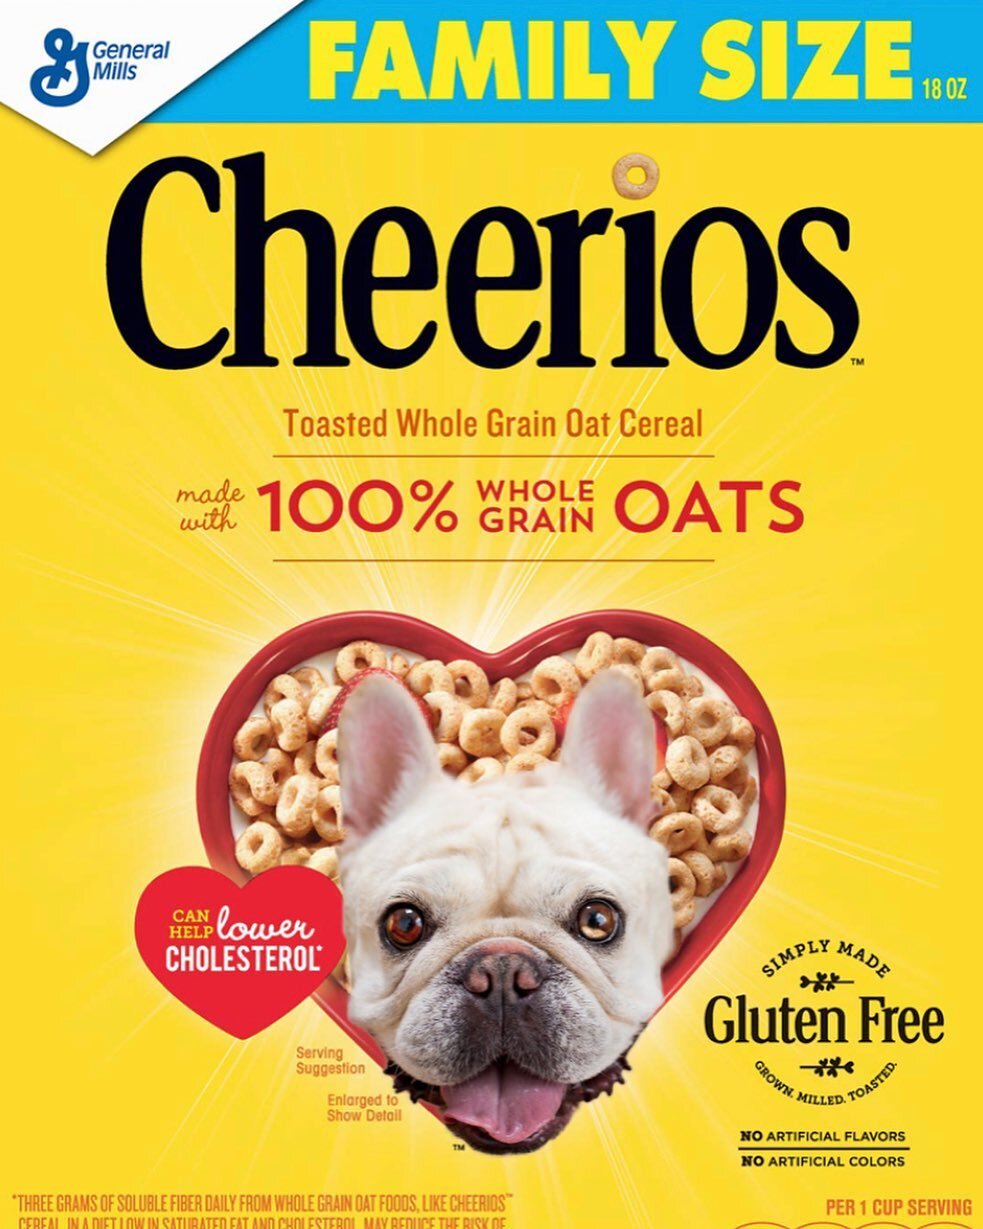 LIMITED EDITION - @cheerios x @cashewthefrenchie  dropping this month! ❤️ Make sure you get the family size so you can share these frenchie shaped oat nuggets with frens! 

Help me spread the pawsitivity: 
❤️TAG 3 friends
❤️SHARE to your story 

&bul